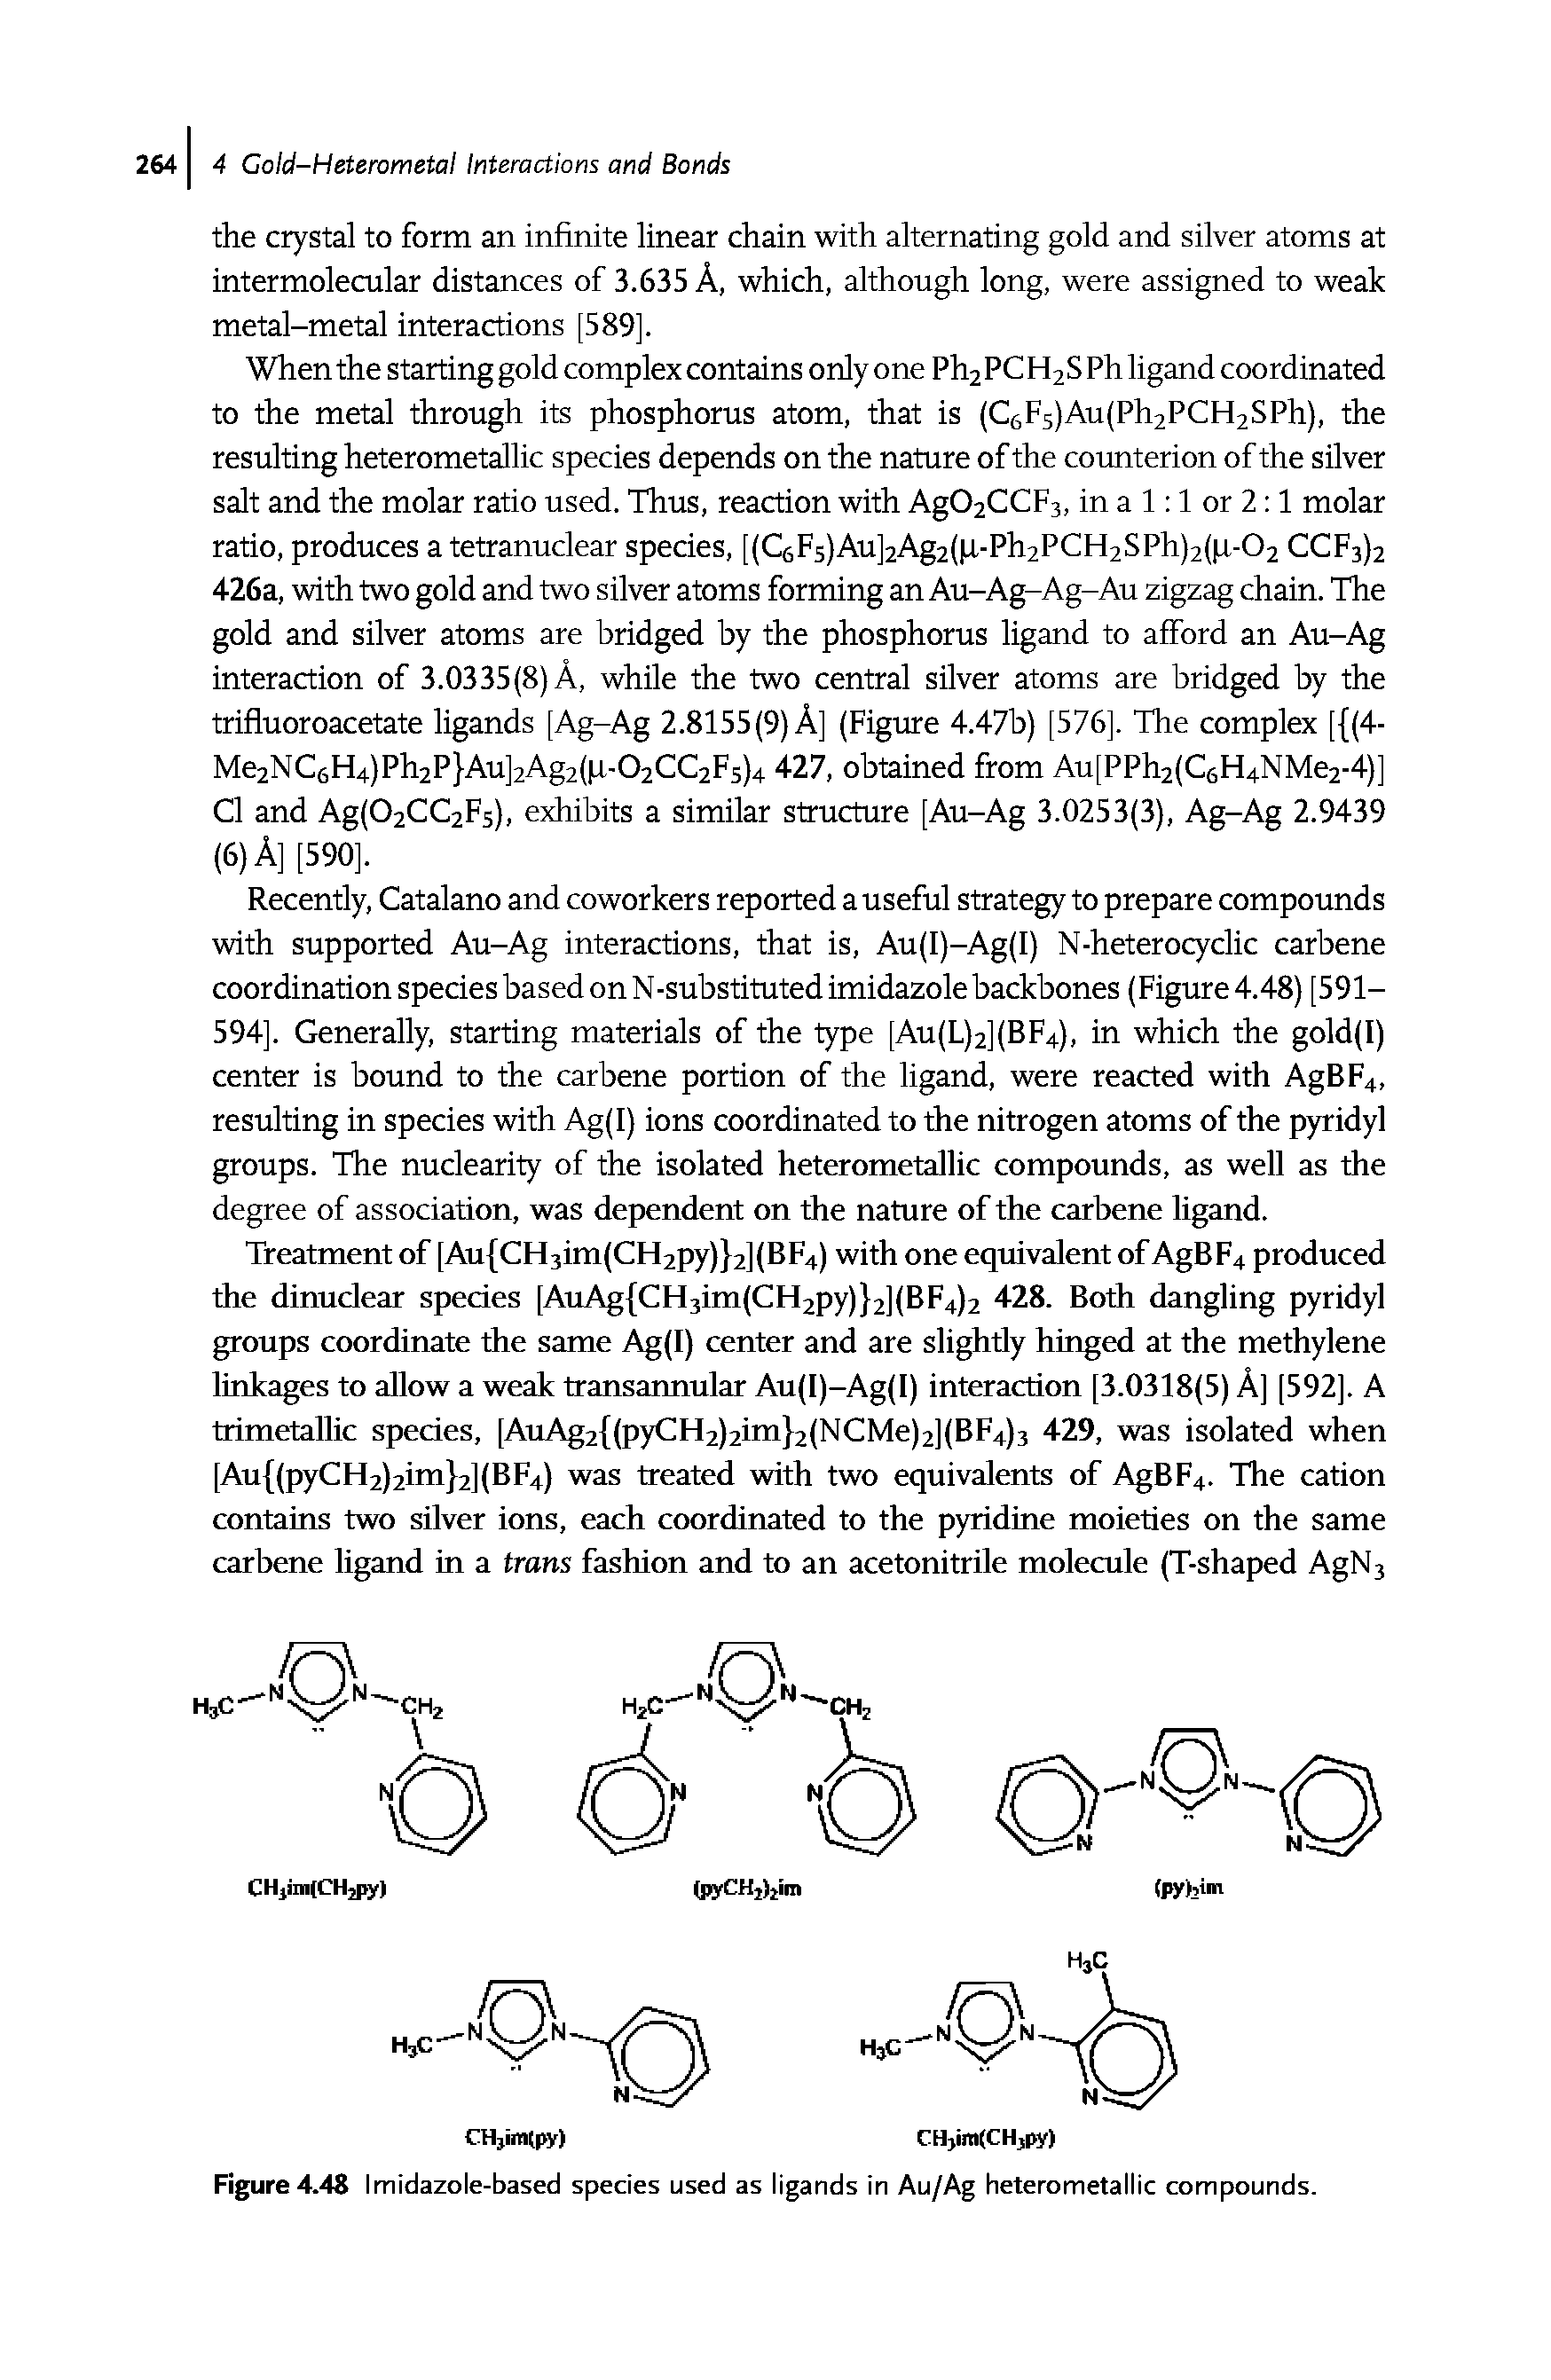 Figure 4.48 Imidazole-based species used as ligands in Au/Ag heterometallic compounds.